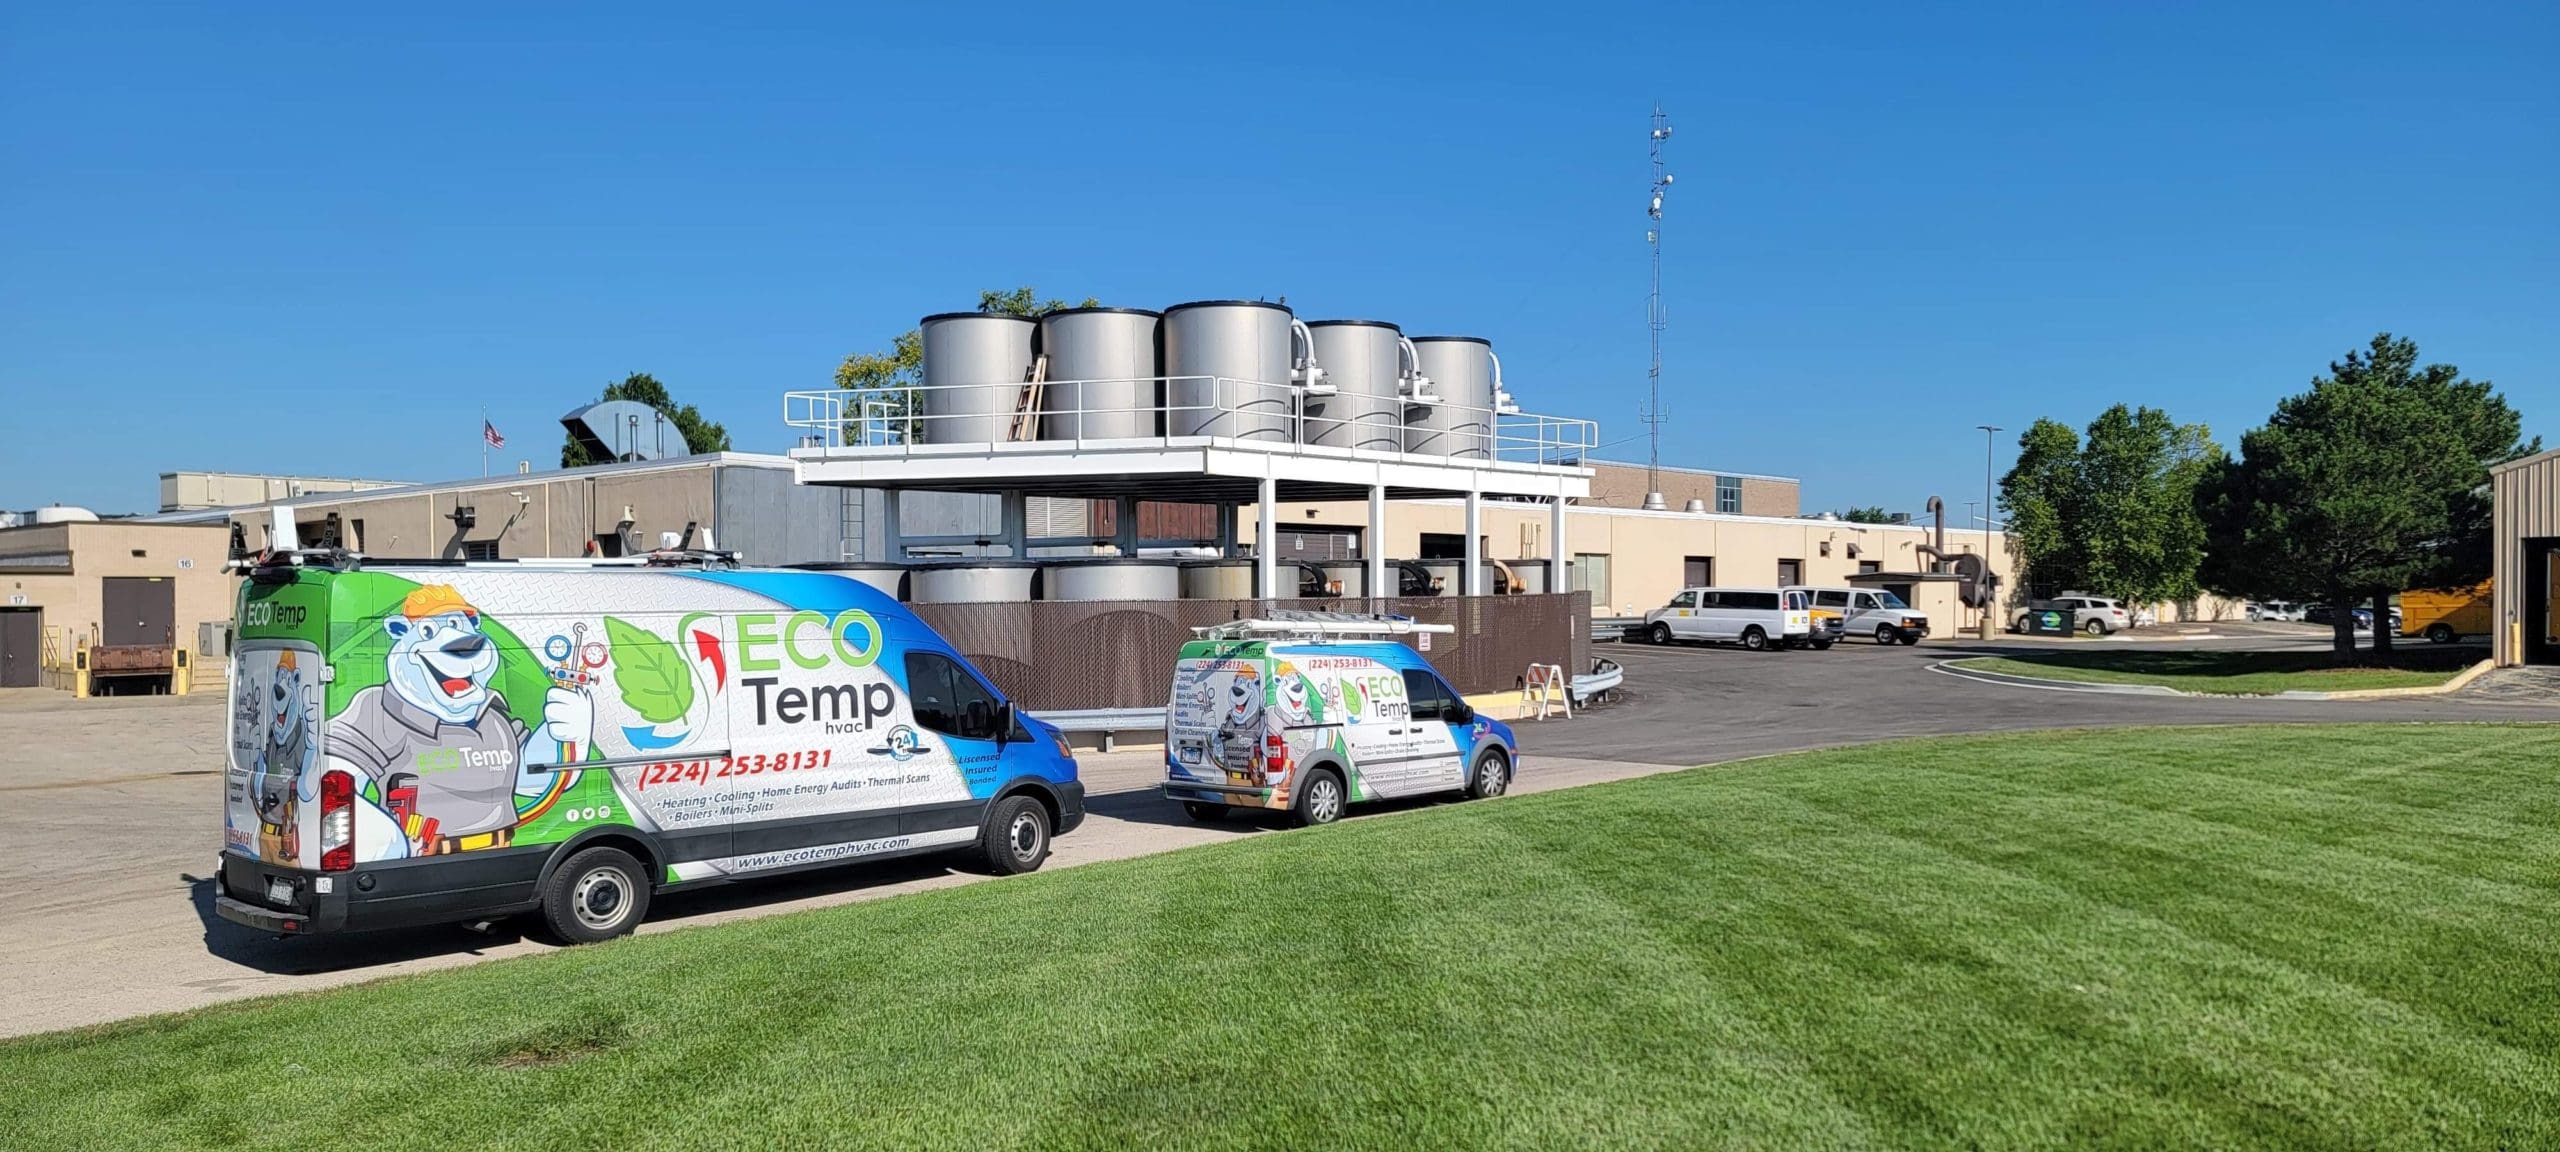 Eco Temp HVAC vans outside of a high school while the technicians are inside repairing their AC units.